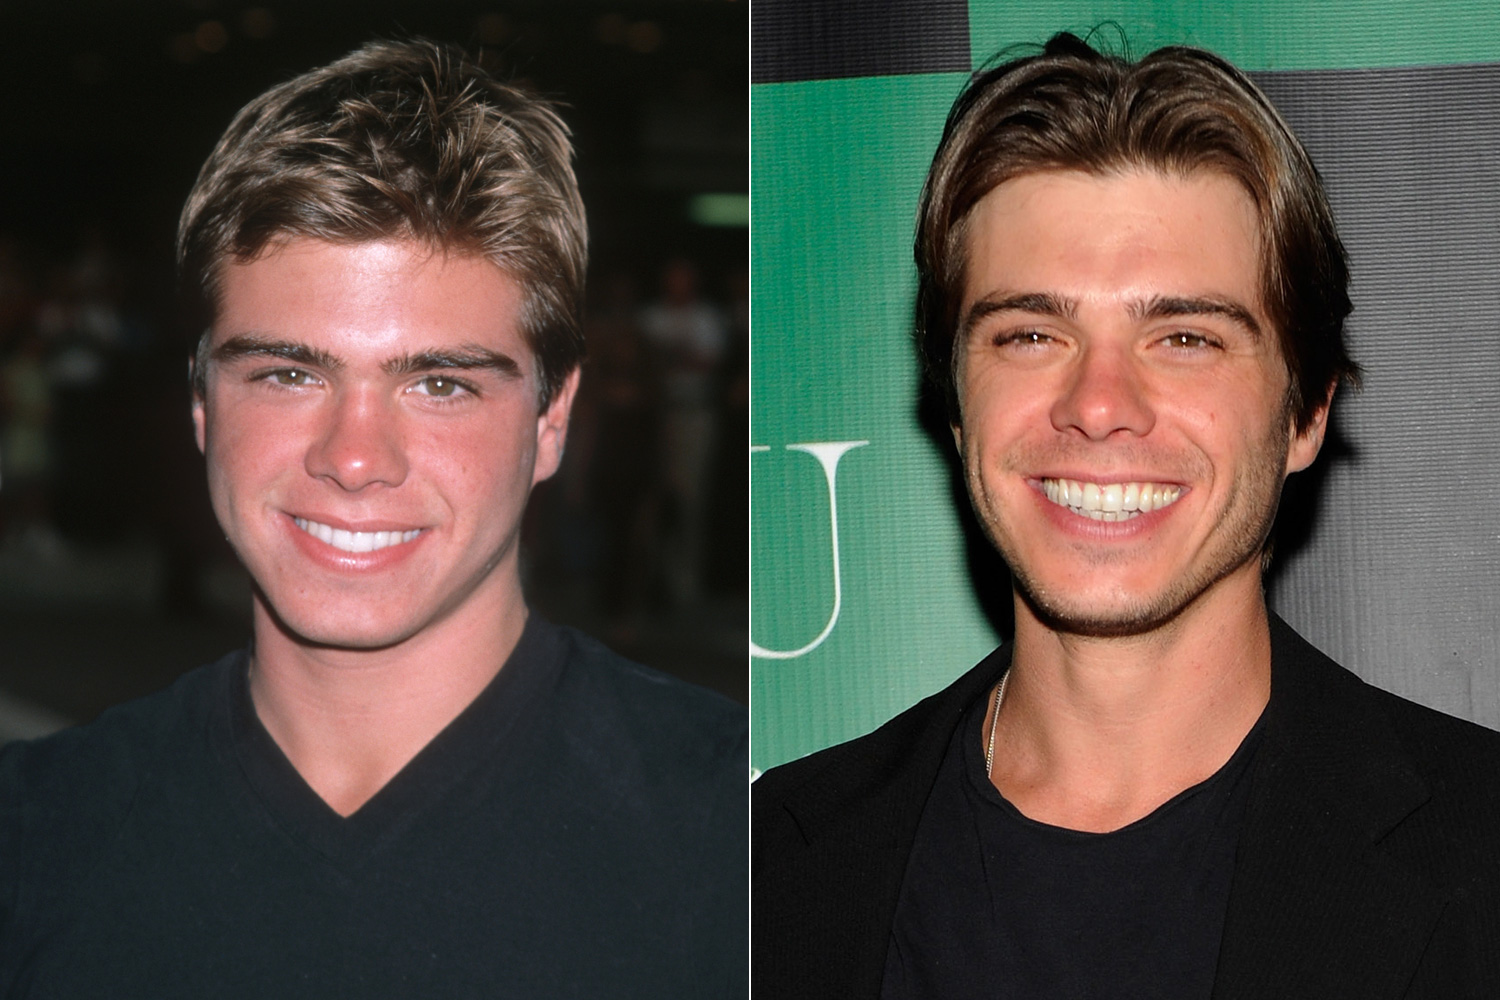 No word yet as to whether Strong's on-screen brother, Matthew Lawrence will be returning as Jack. The issue is perhaps muddled because it appears that Lawrence has not aged a day in the last 15 years.